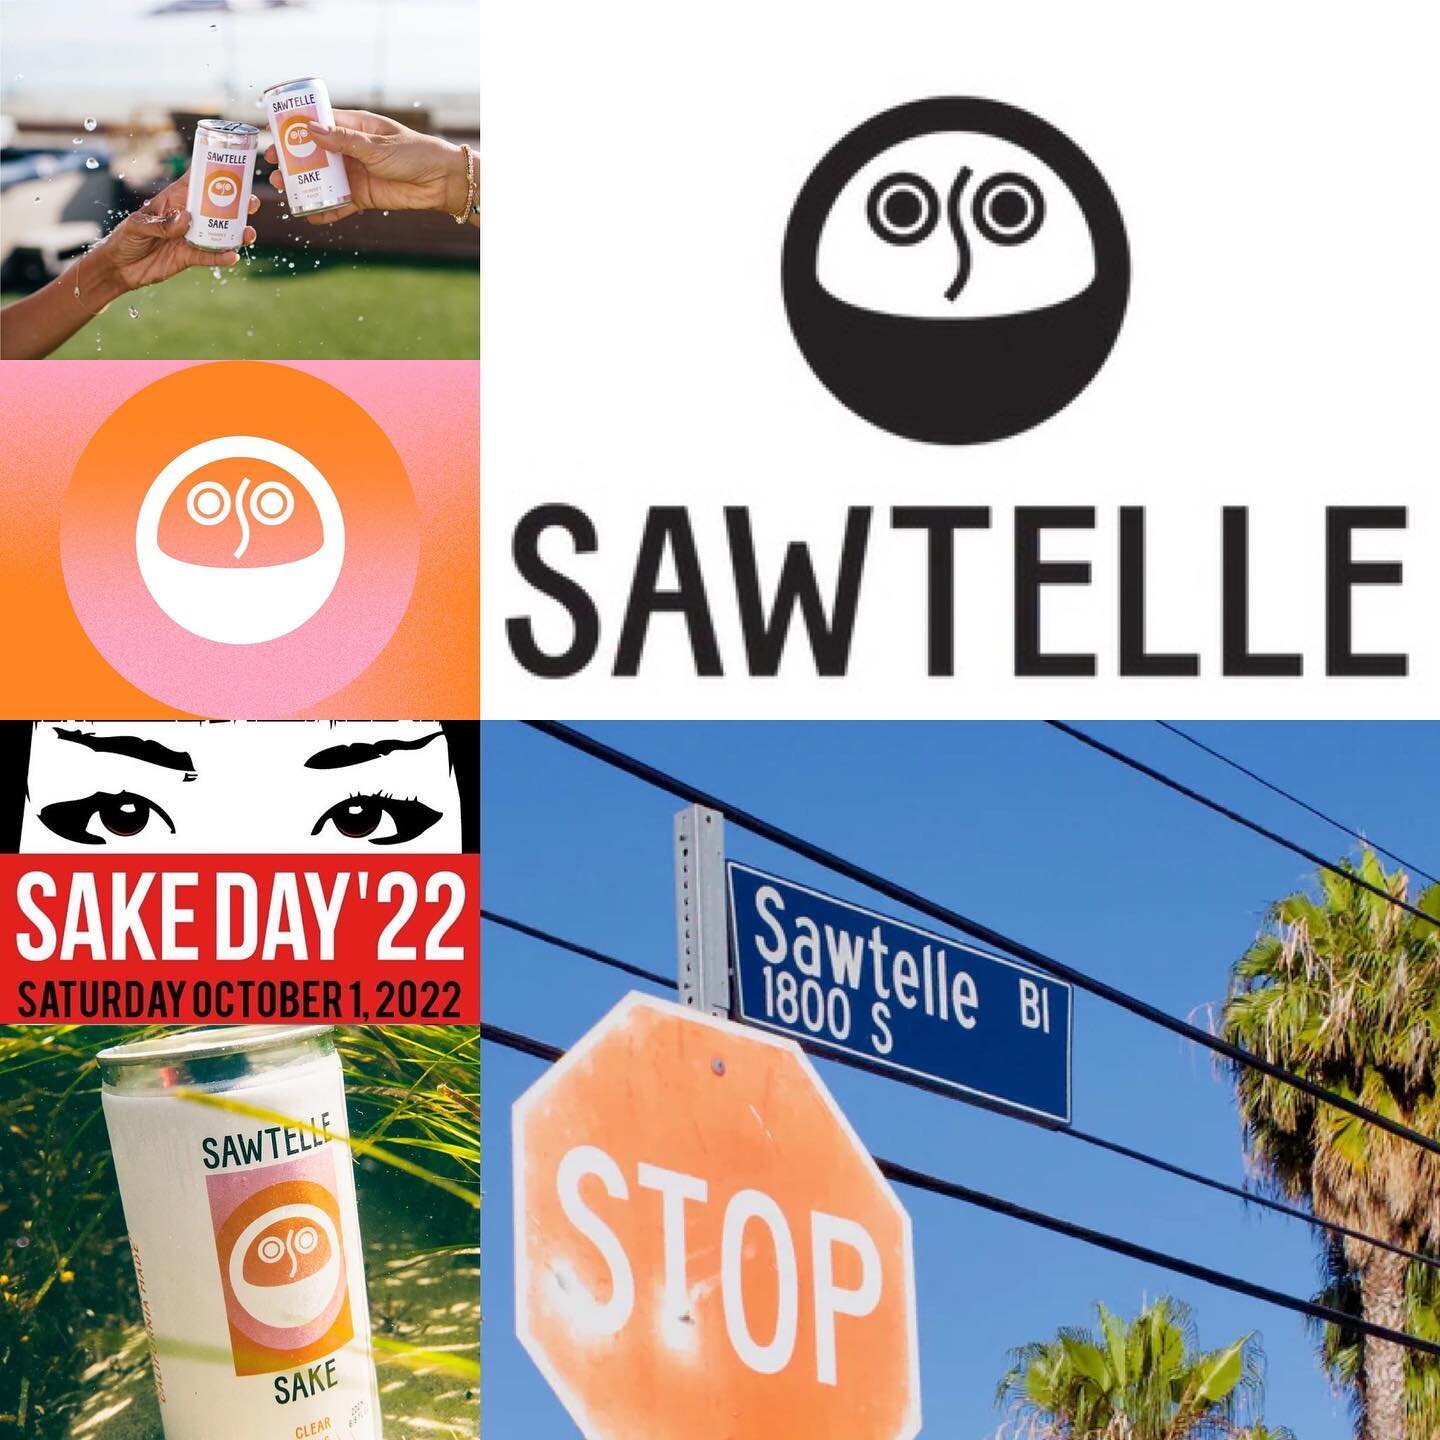 ❤️🍶 We love new vendor participants at SAKE DAY, especially when they are crafty and cool! 🍶❤️ 

Get ready to say hello to @sawtellesake and their good luck mascot &quot;Daryl Daruma&quot; coming from LA to pour their brews with rice grown in Sacra